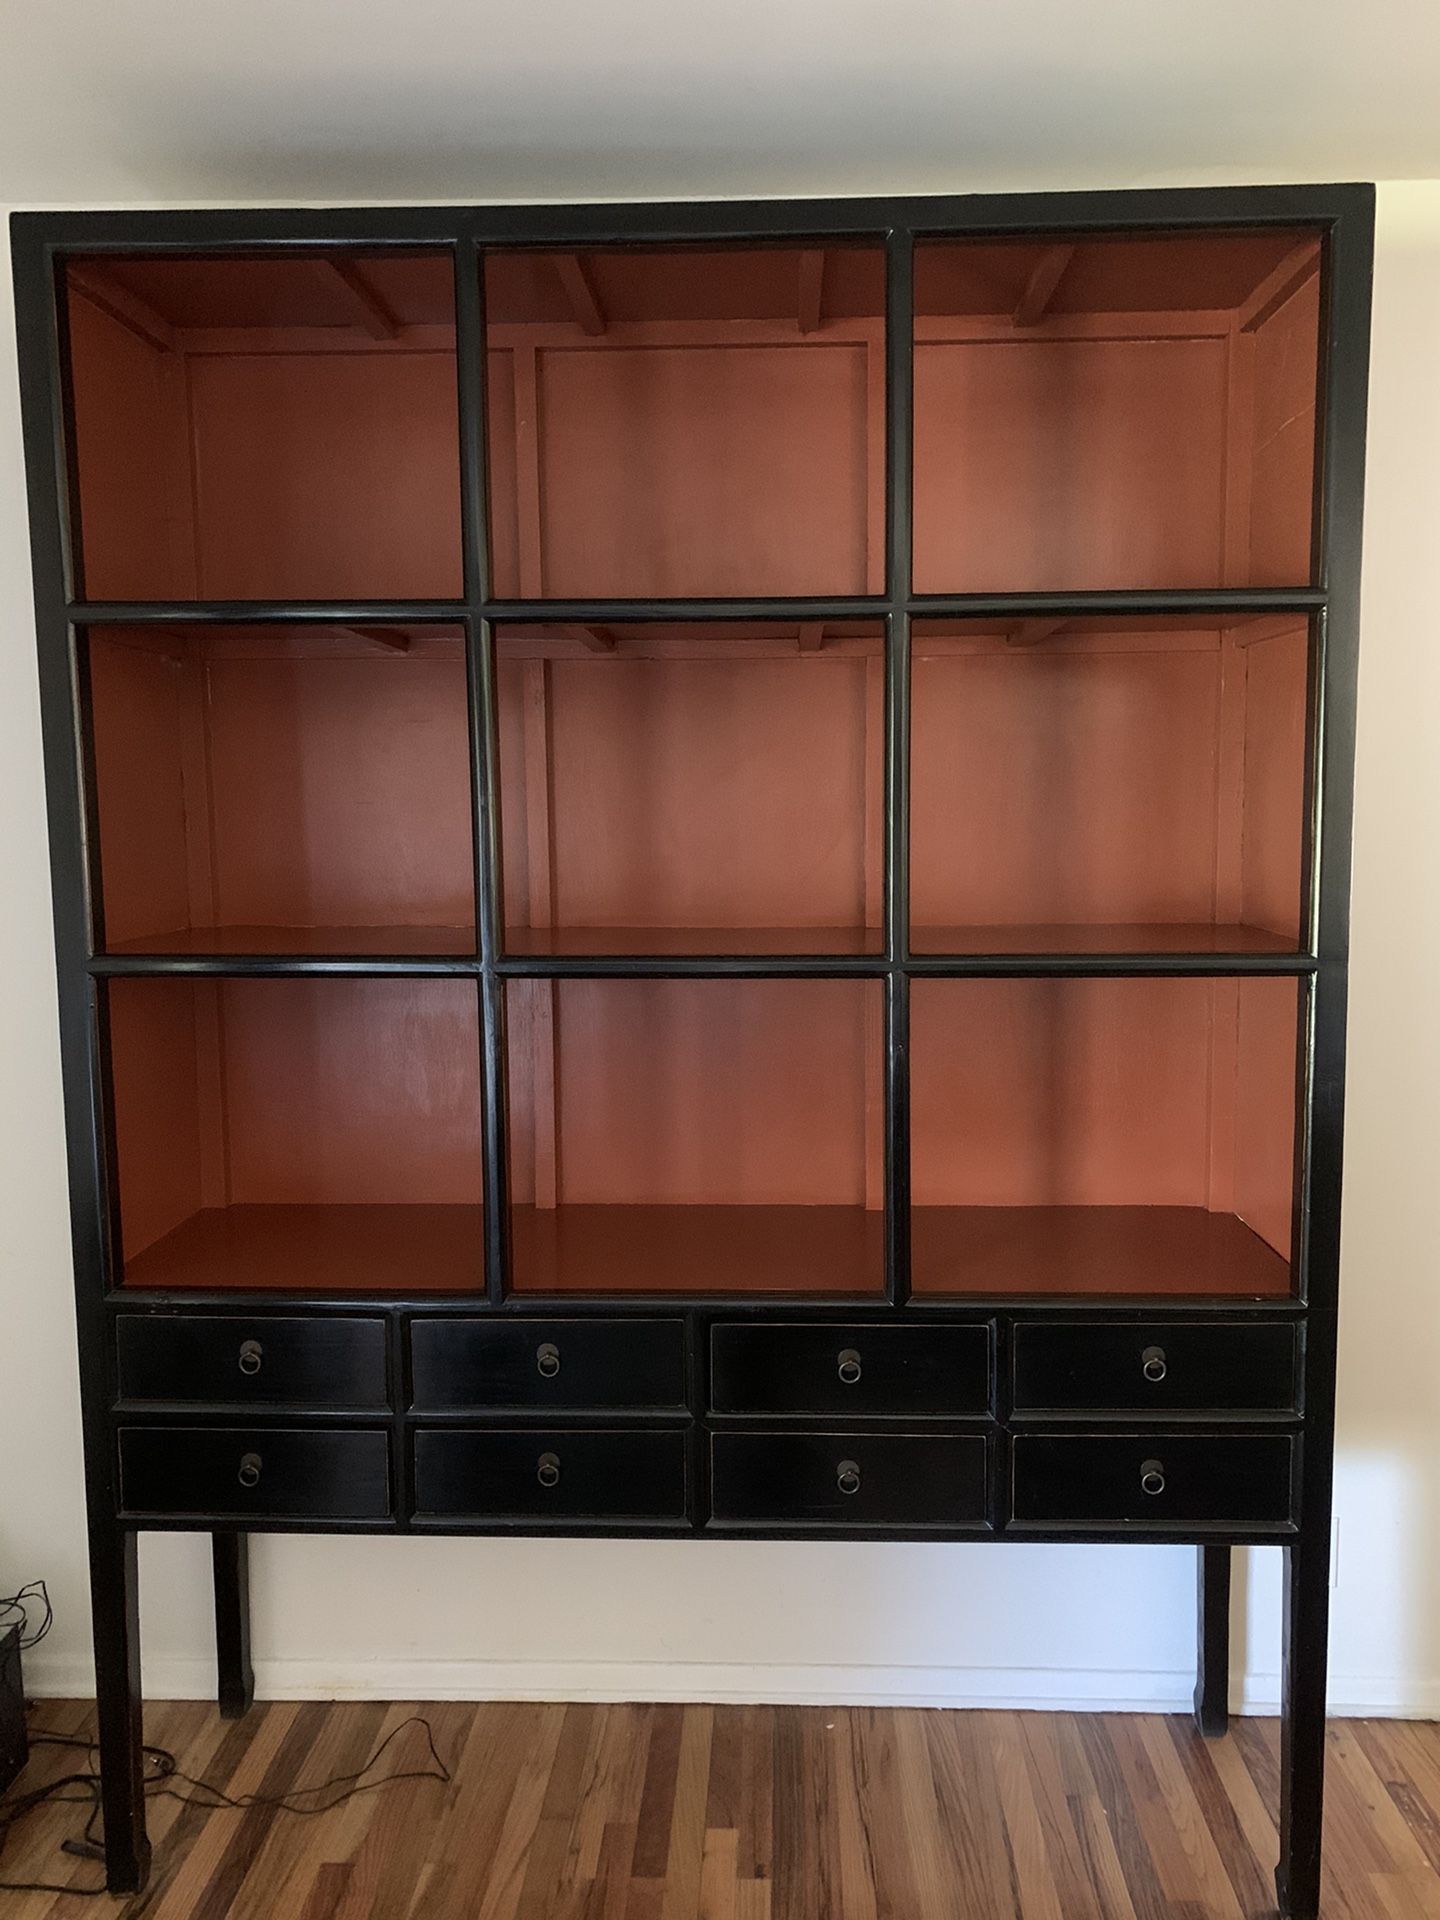 Large living room statement piece with great function! There are 8 separate drawers for storage and large shelves for books, photos and mementos.